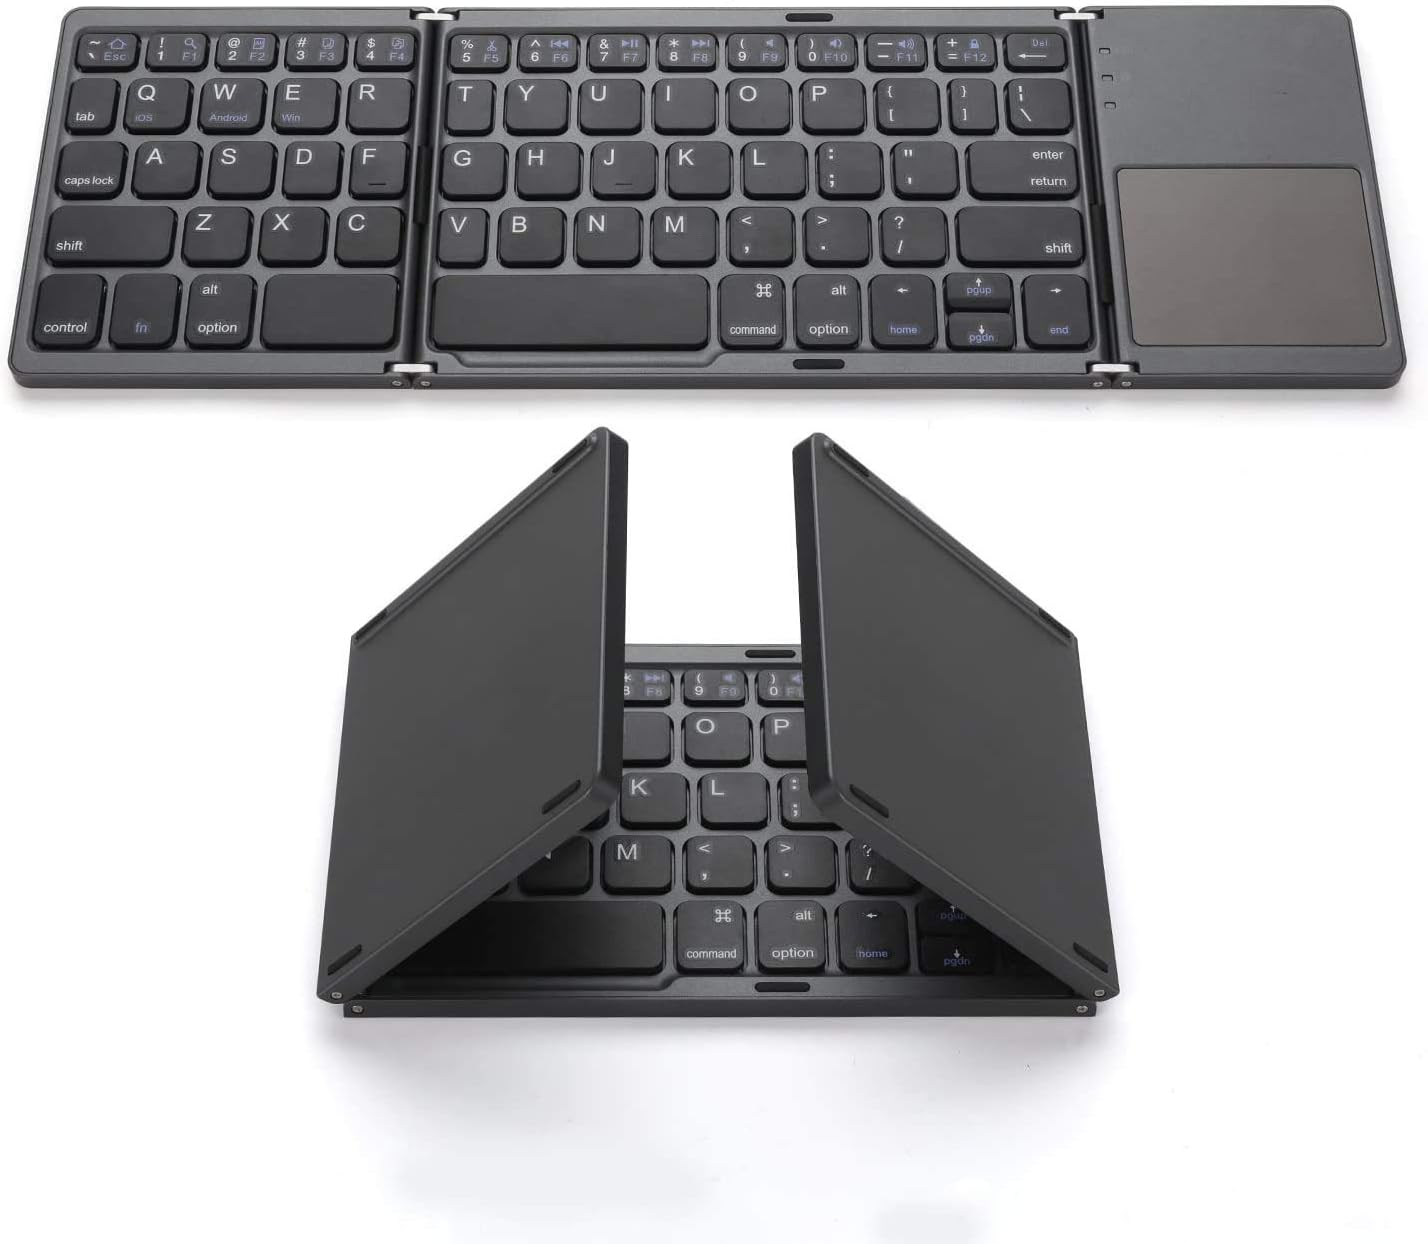 POPULAR Gimibox Foldable Bluetooth Keyboard, Pocket Size Portable Mini BT Wireless Keyboard with Touchpad for Android, Windows, PC, Tablet, with Rechargeable Li-ion Battery-Dark Gray